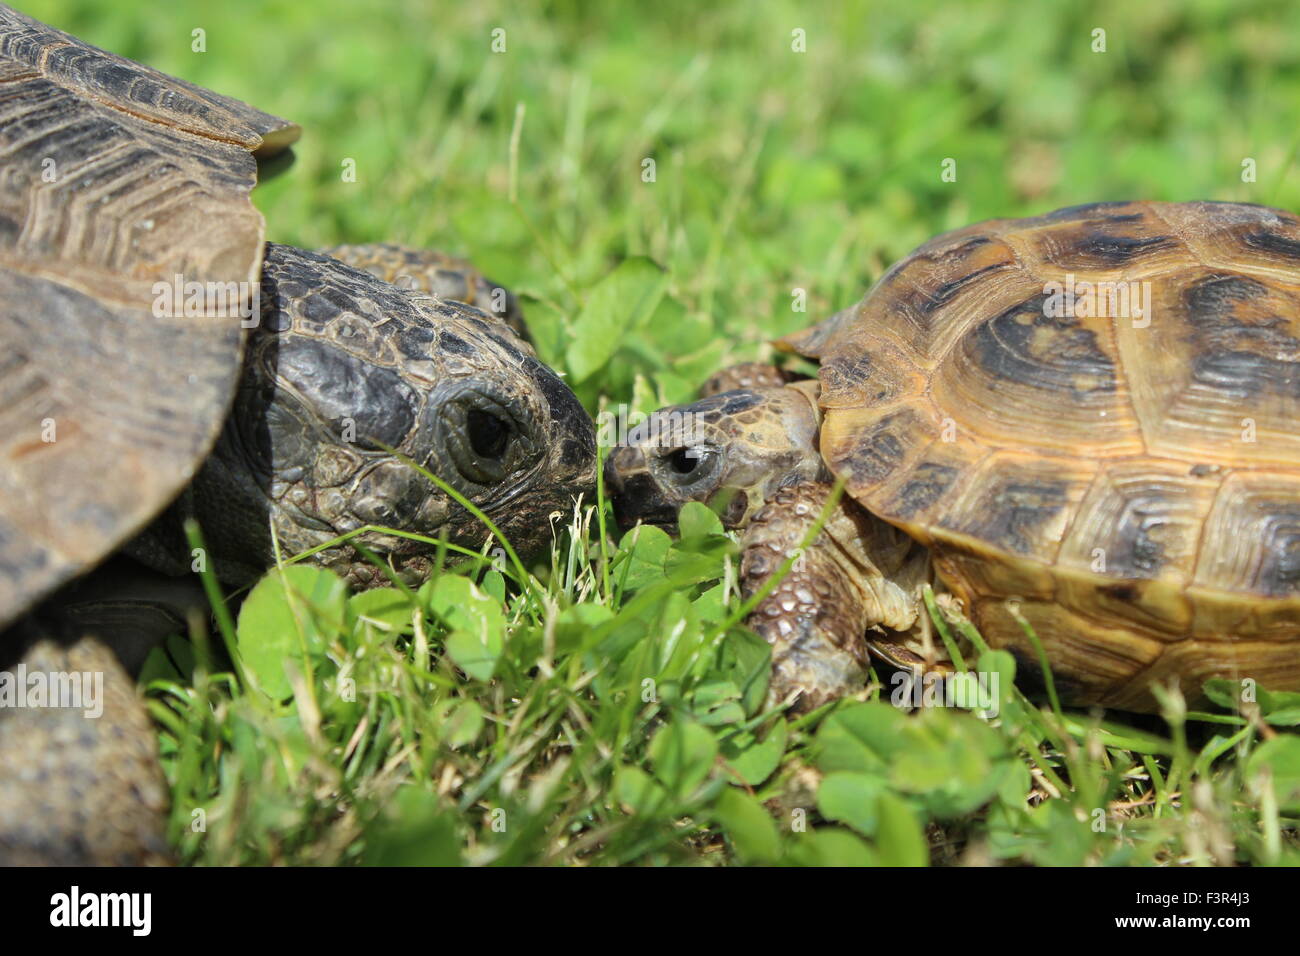 Tortoises tapping each other's nose Stock Photo